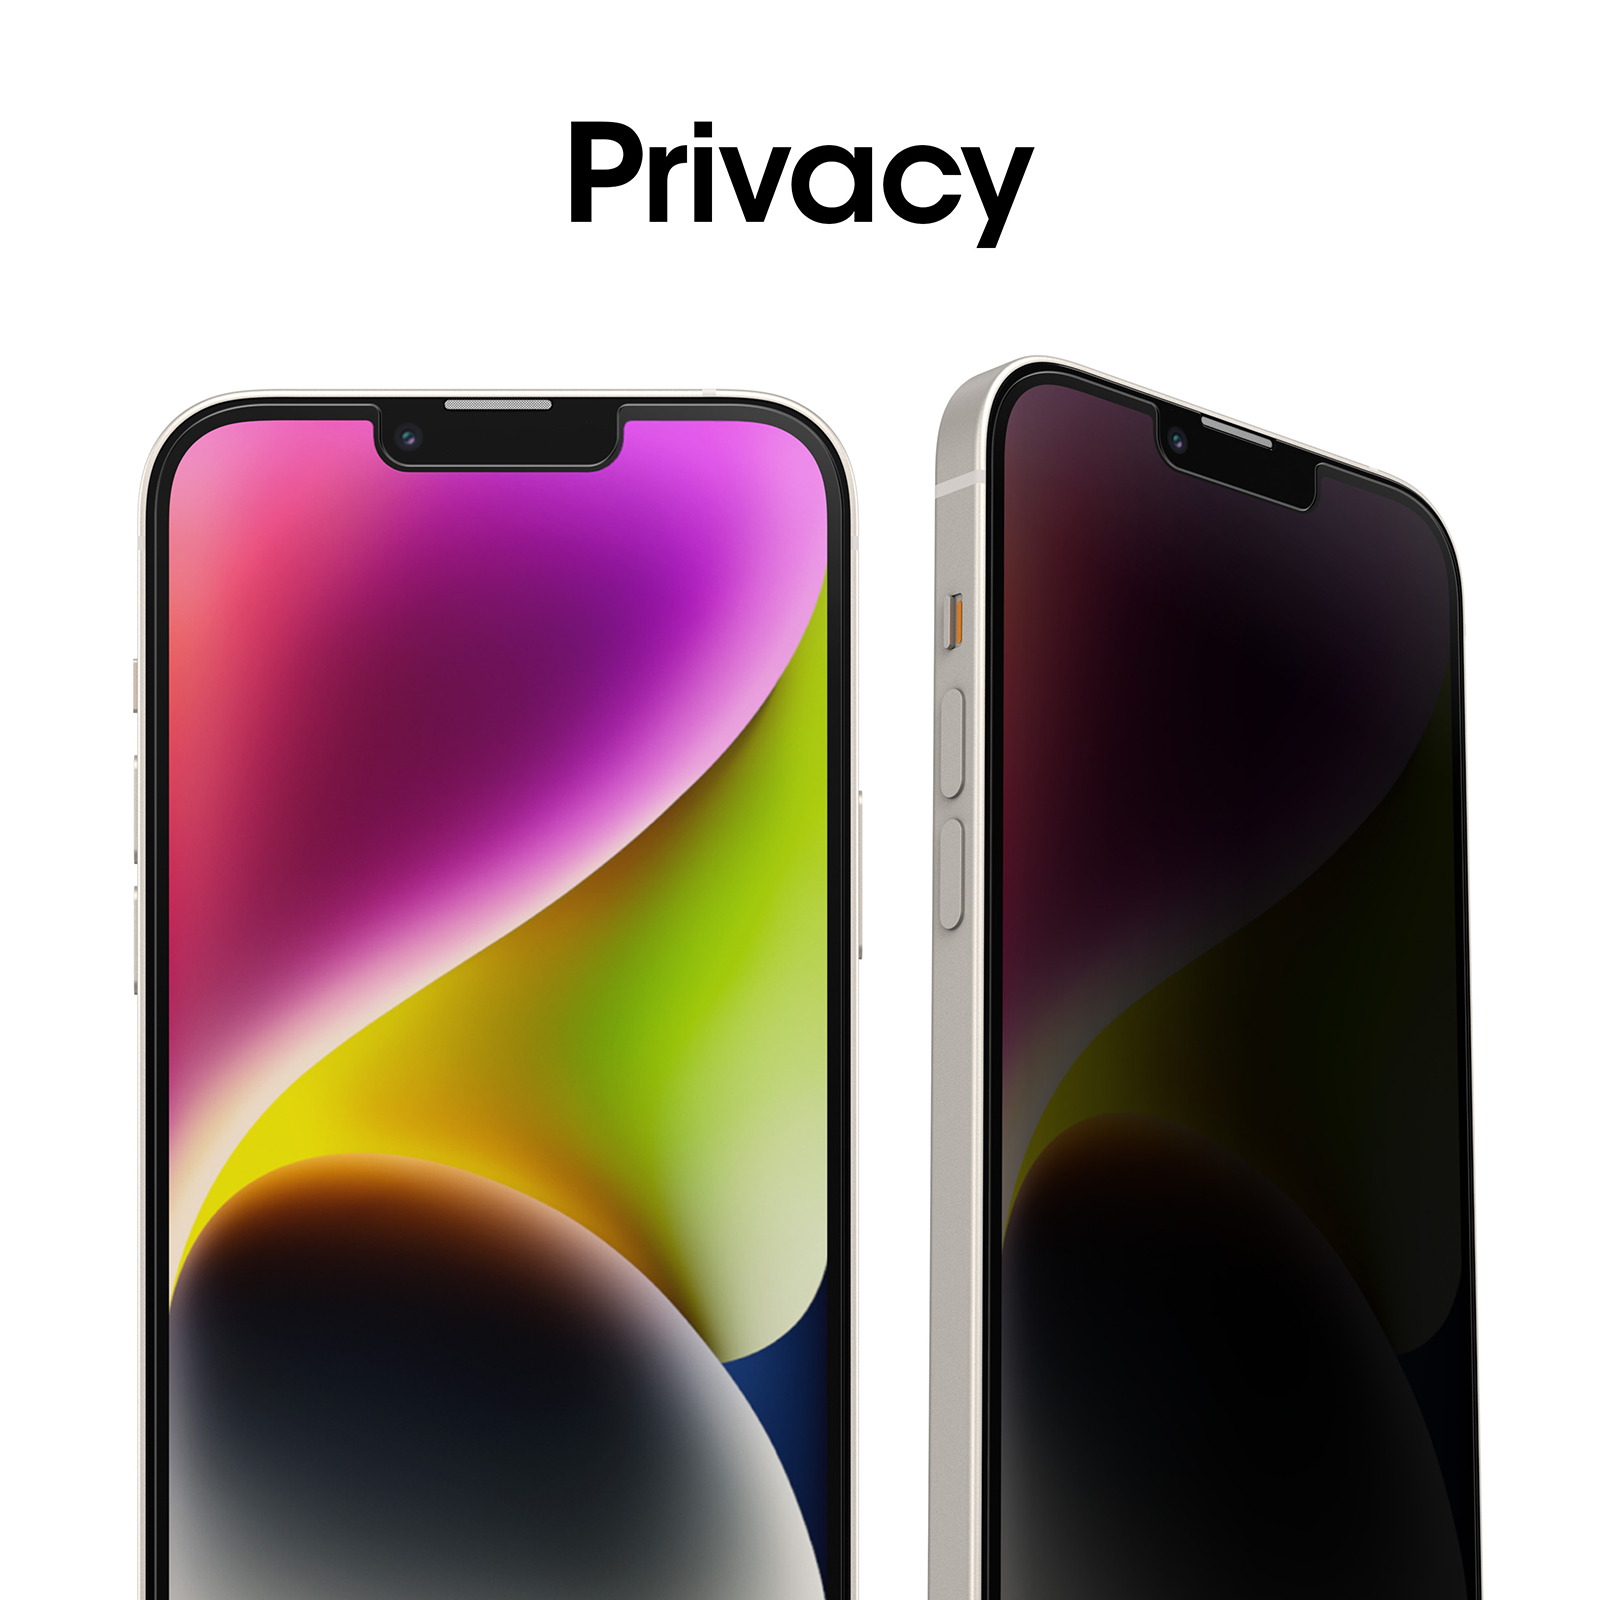 https://www.otterbox.com/on/demandware.static/-/Sites-masterCatalog/en/dwd5b5533b/productimages/dis/cases-screen-protection/amplify-iphd22/amplify-iphd22-privacy-4.jpg